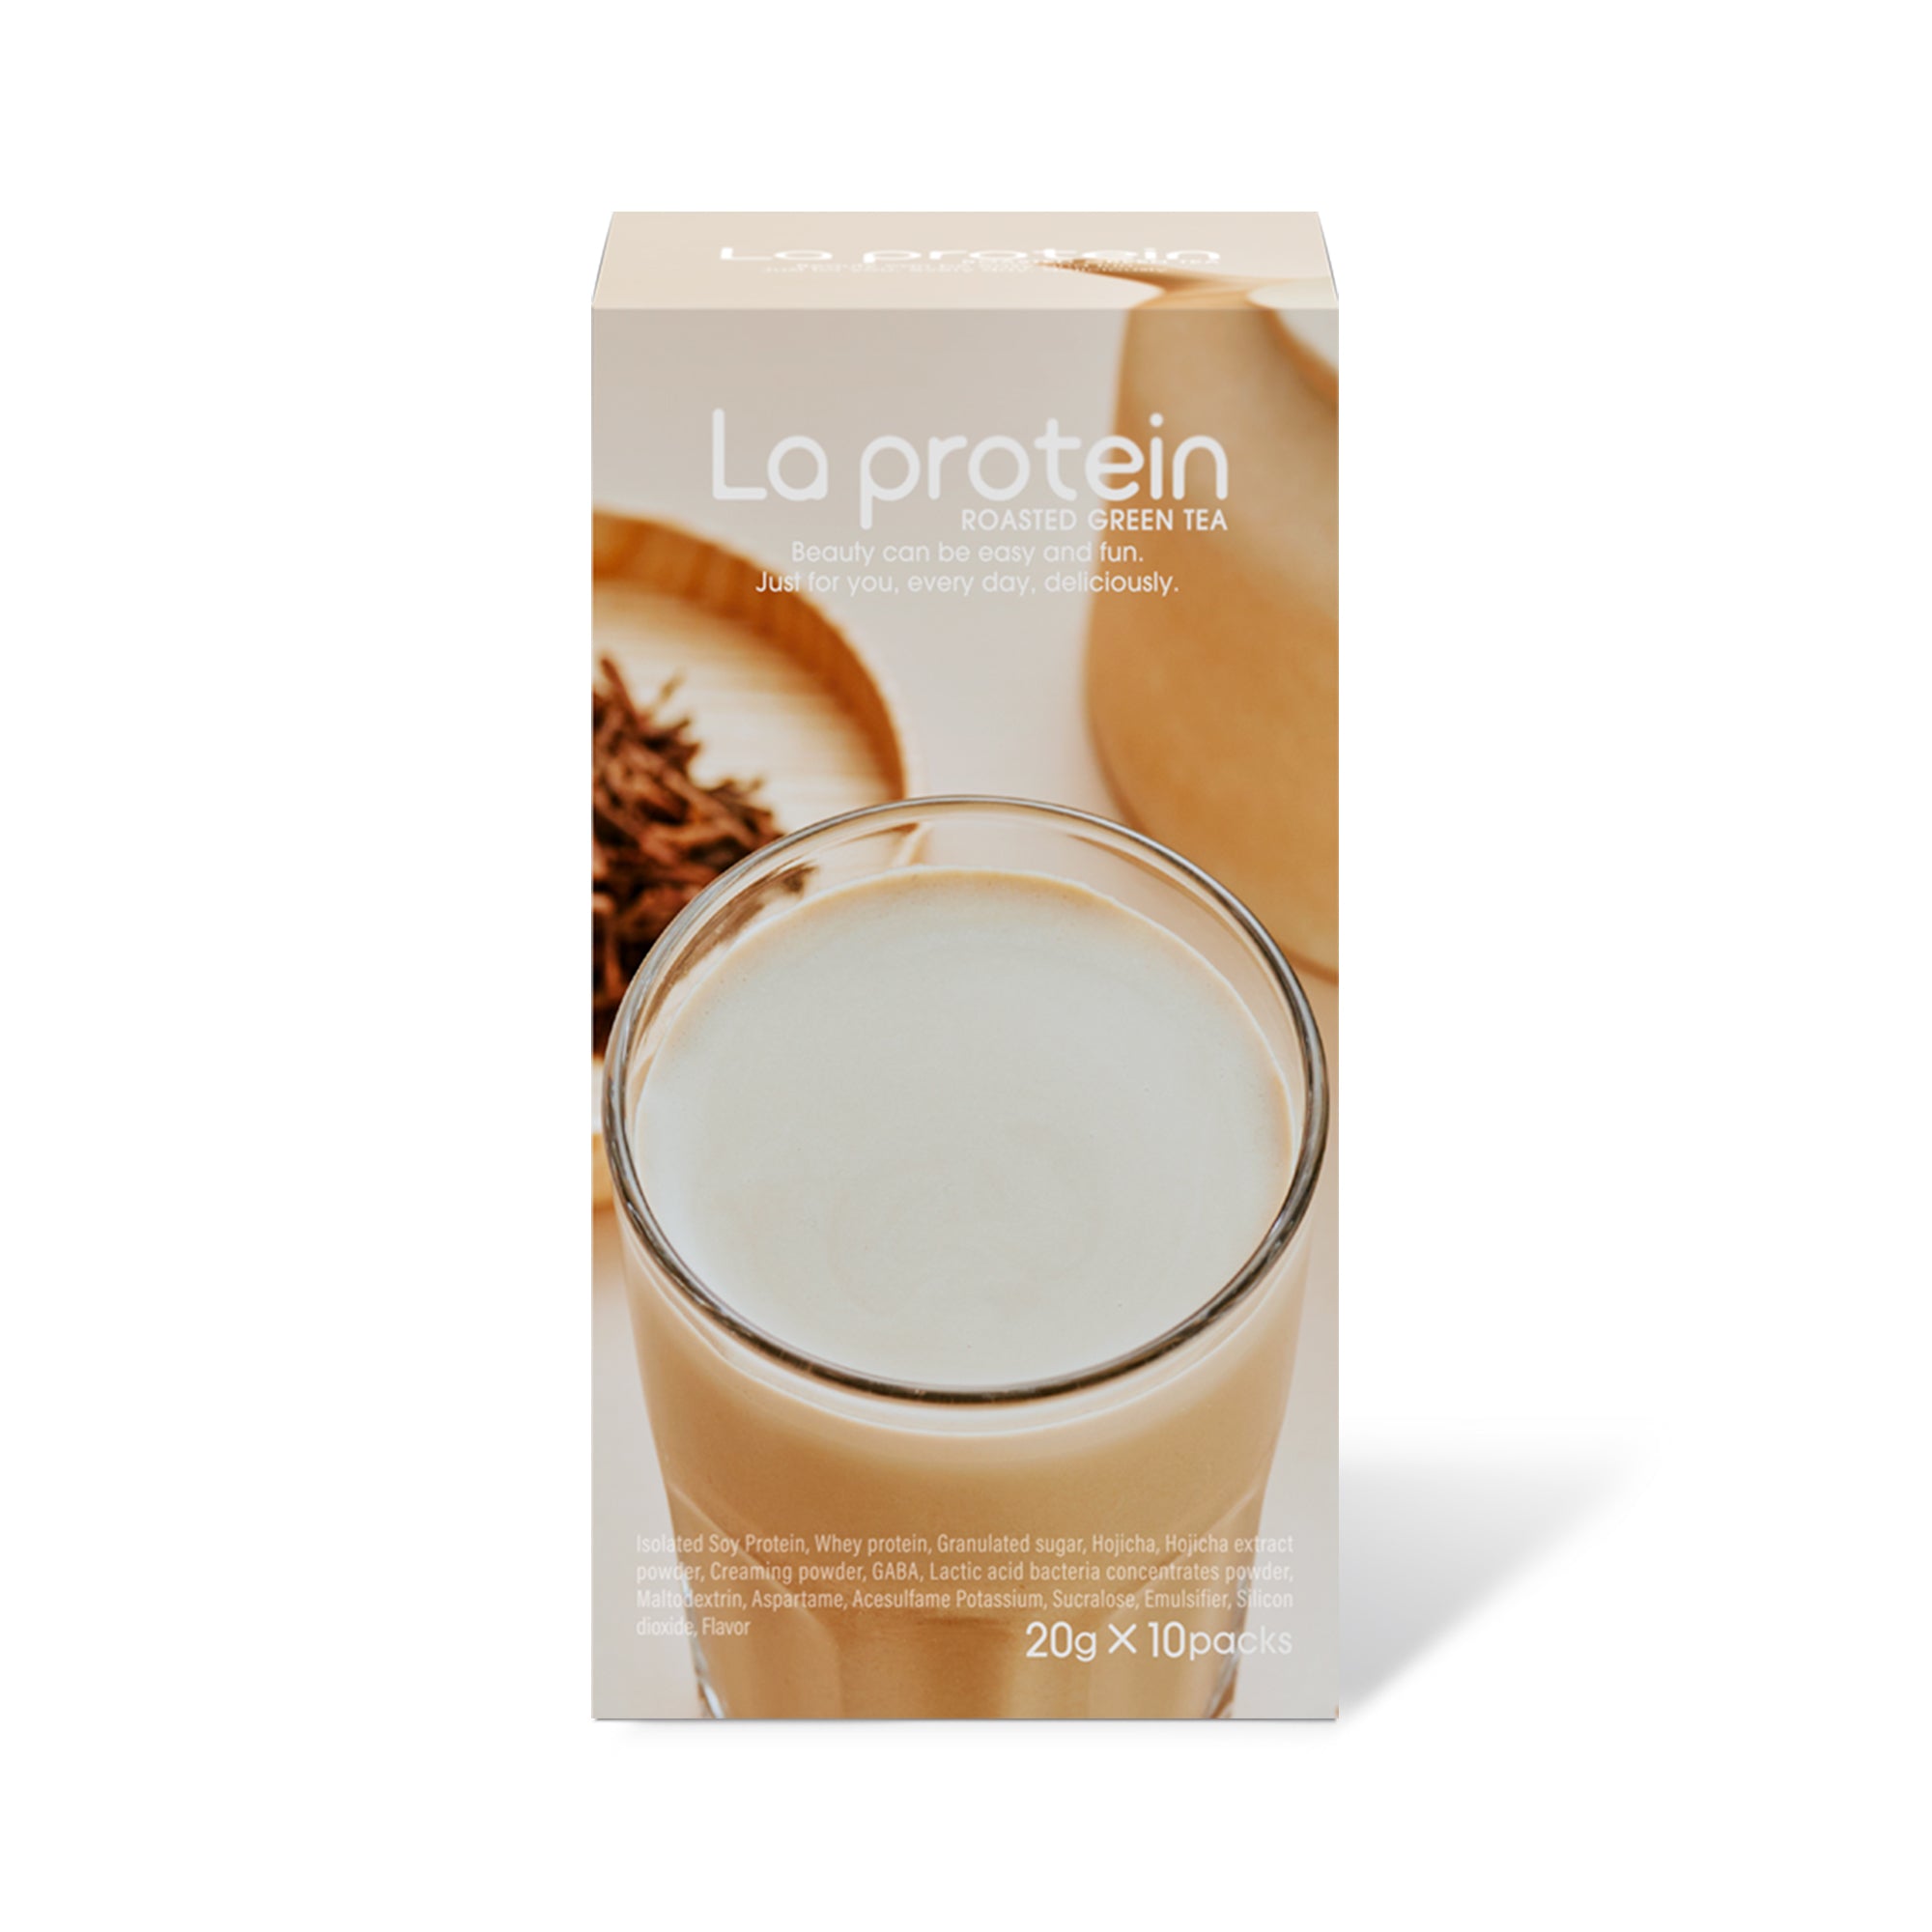 PRODUCTS – La protein